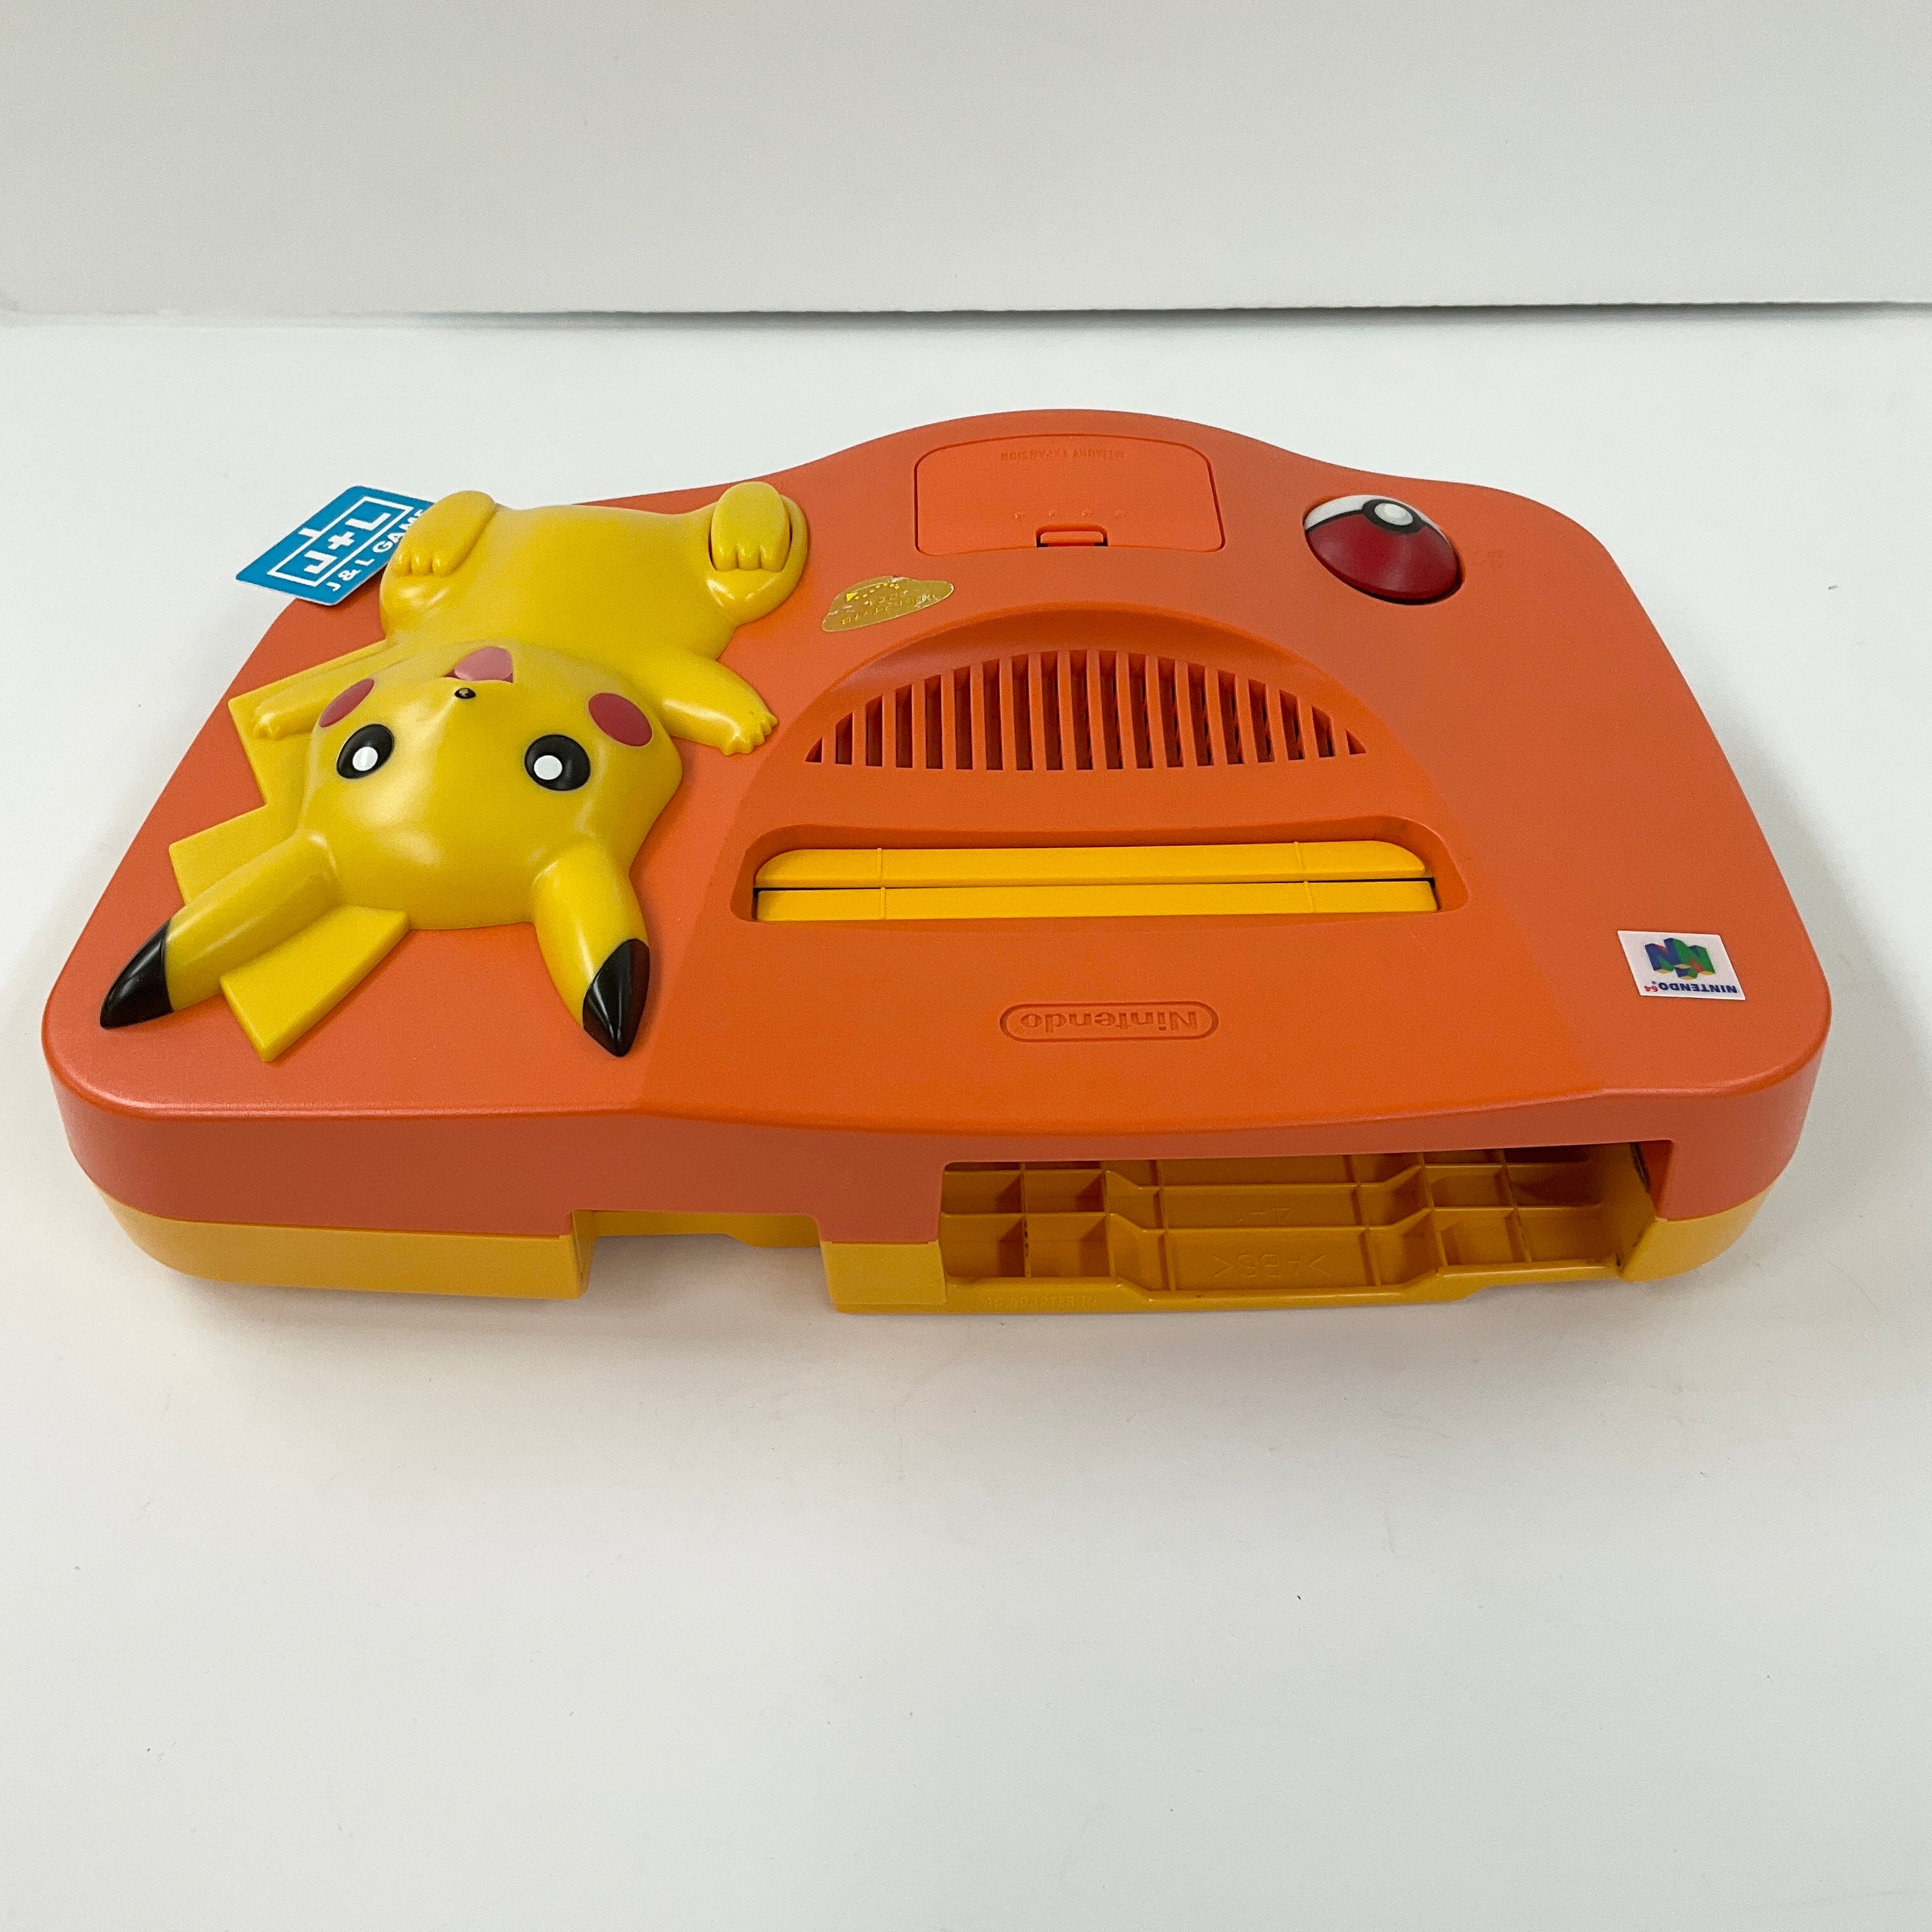 Nintendo 64 Hardware Console (Pikachu Edition) (Orange and Yellow) - (N64) Nintendo 64 (Japanese Import) [Pre-Owned] CONSOLE Nintendo   